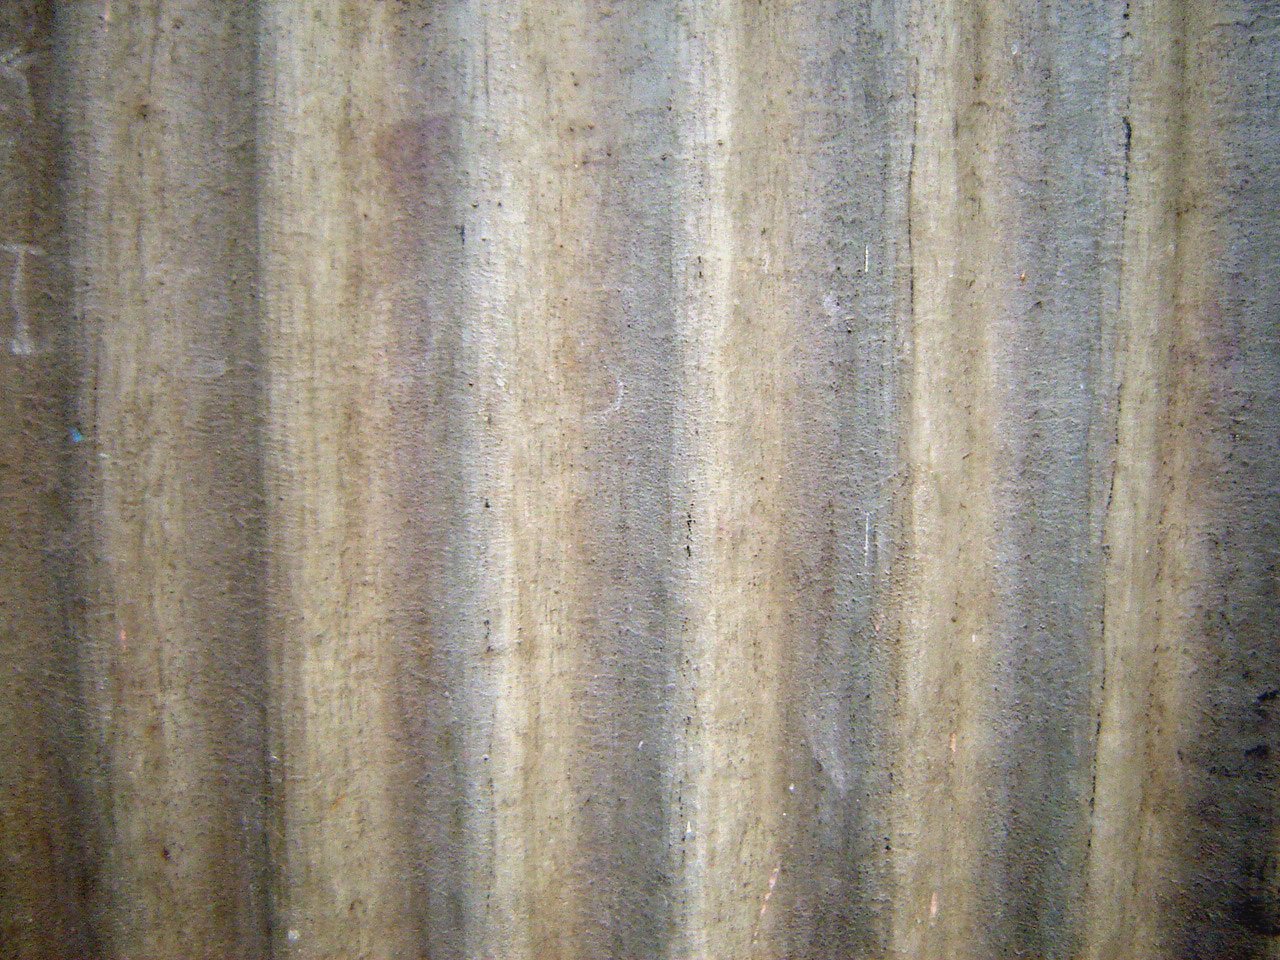 an image of brown and black stripes on the wall